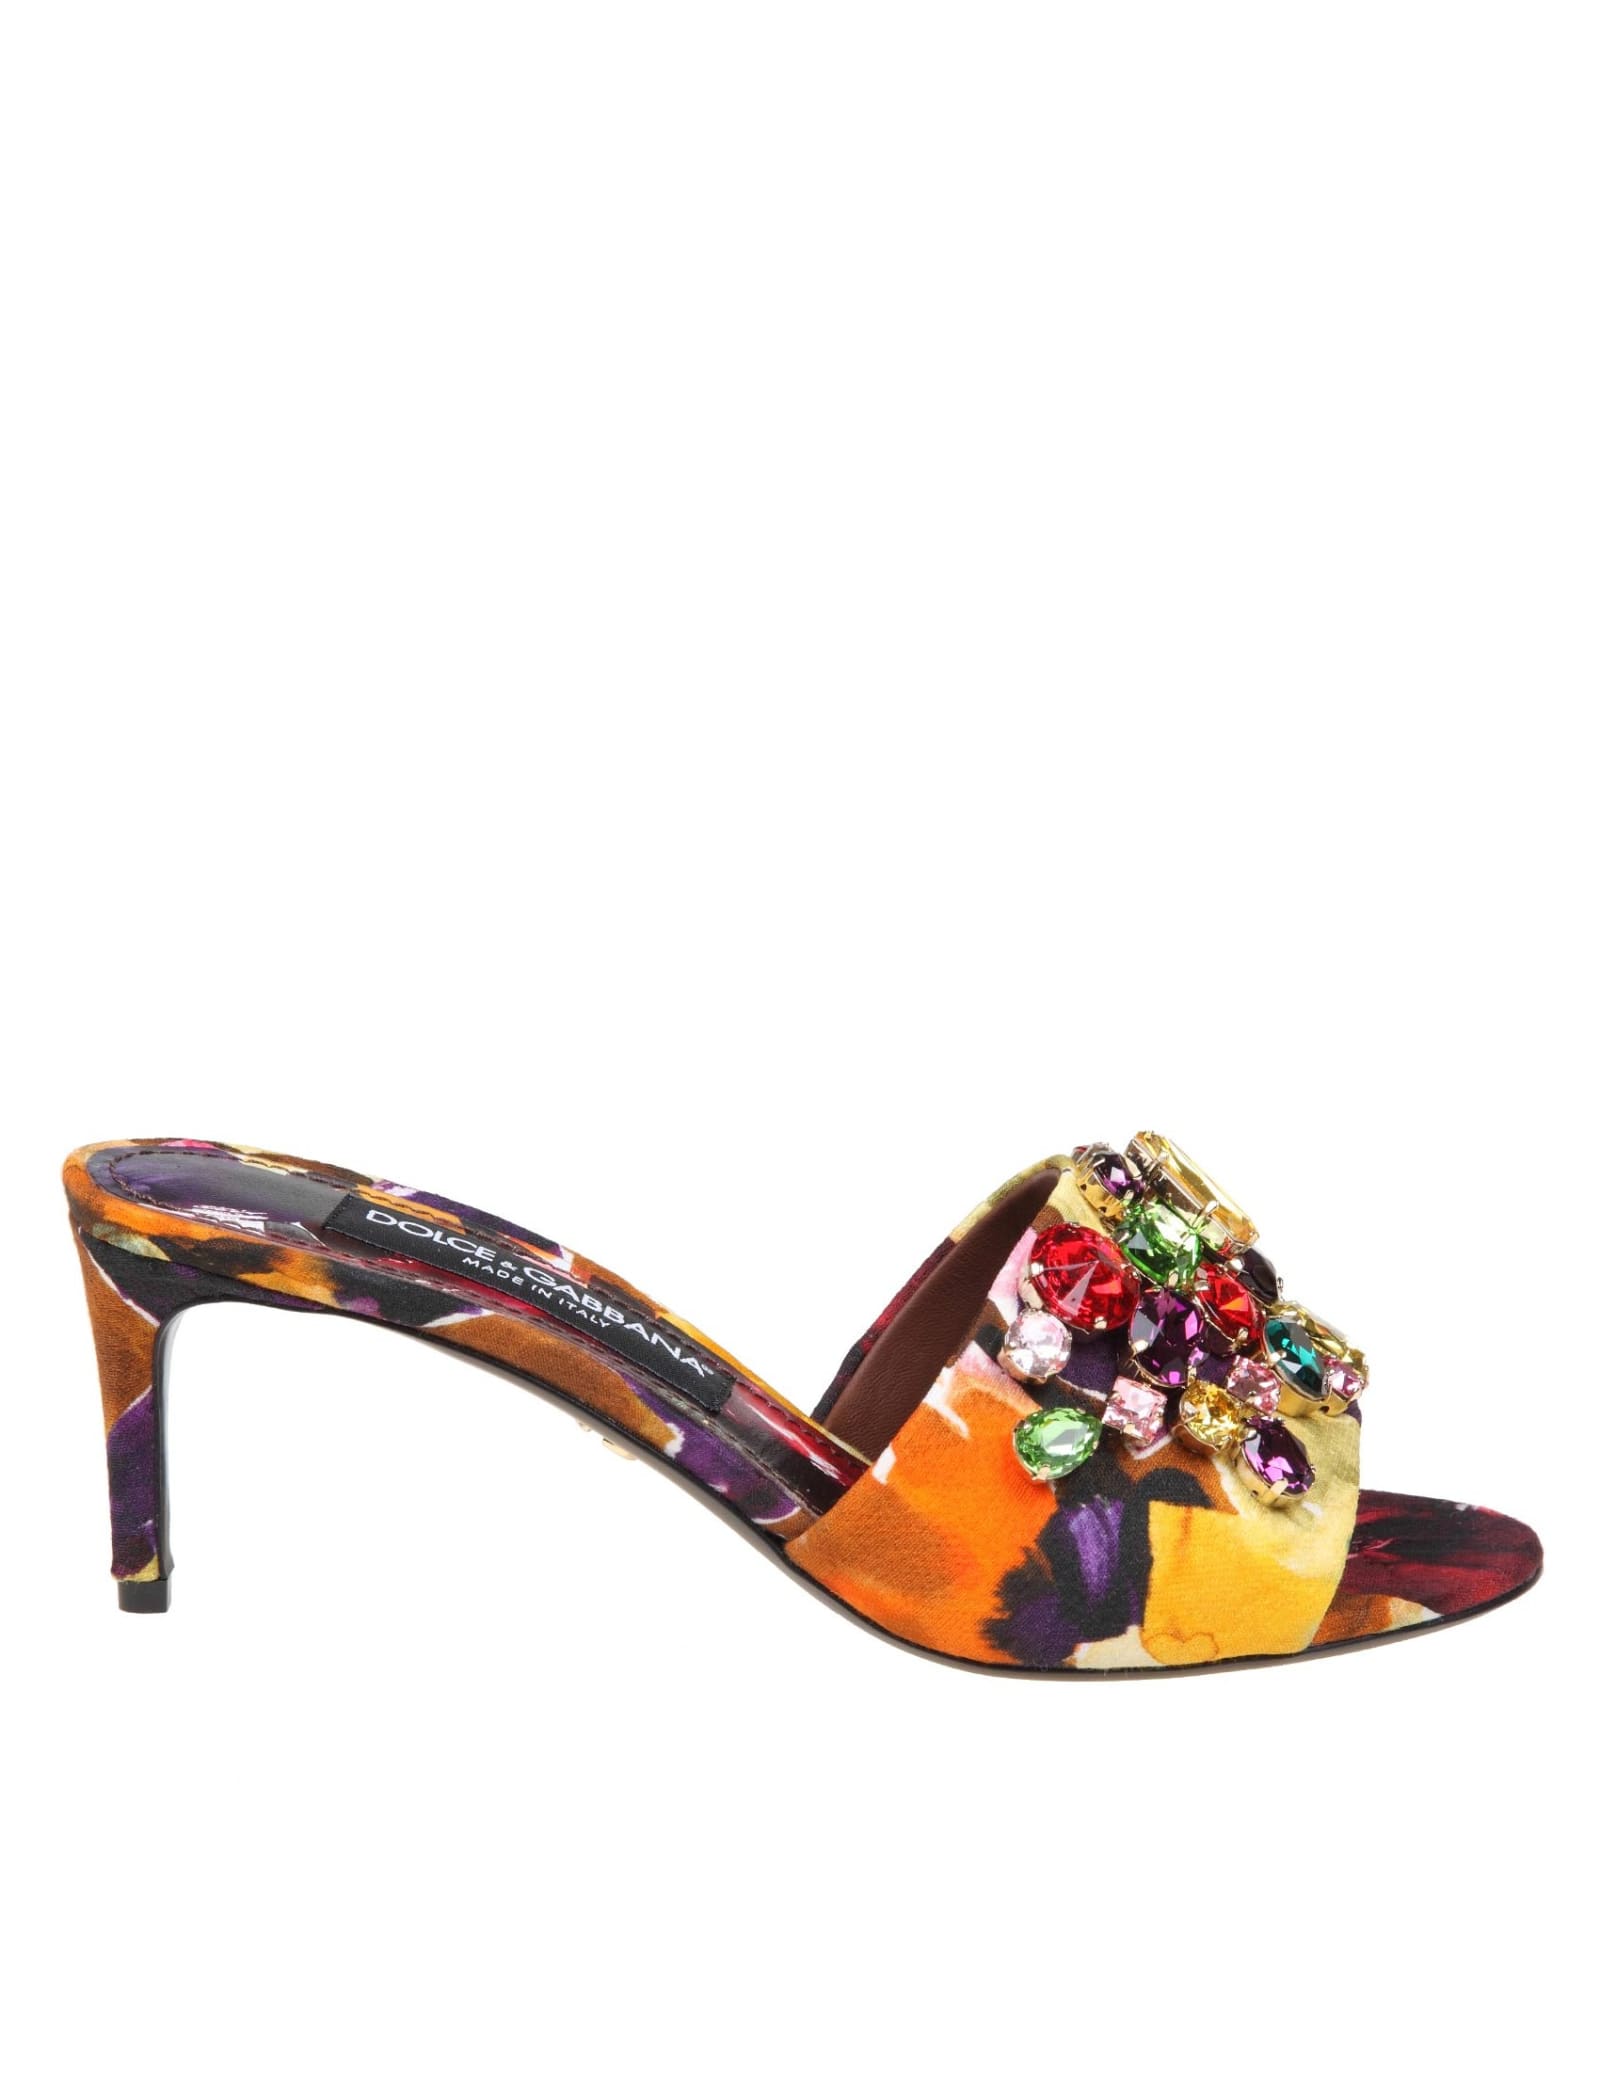 DOLCE & GABBANA SLIPPERS IN BROCADE FABRIC WITH COLORED STONES